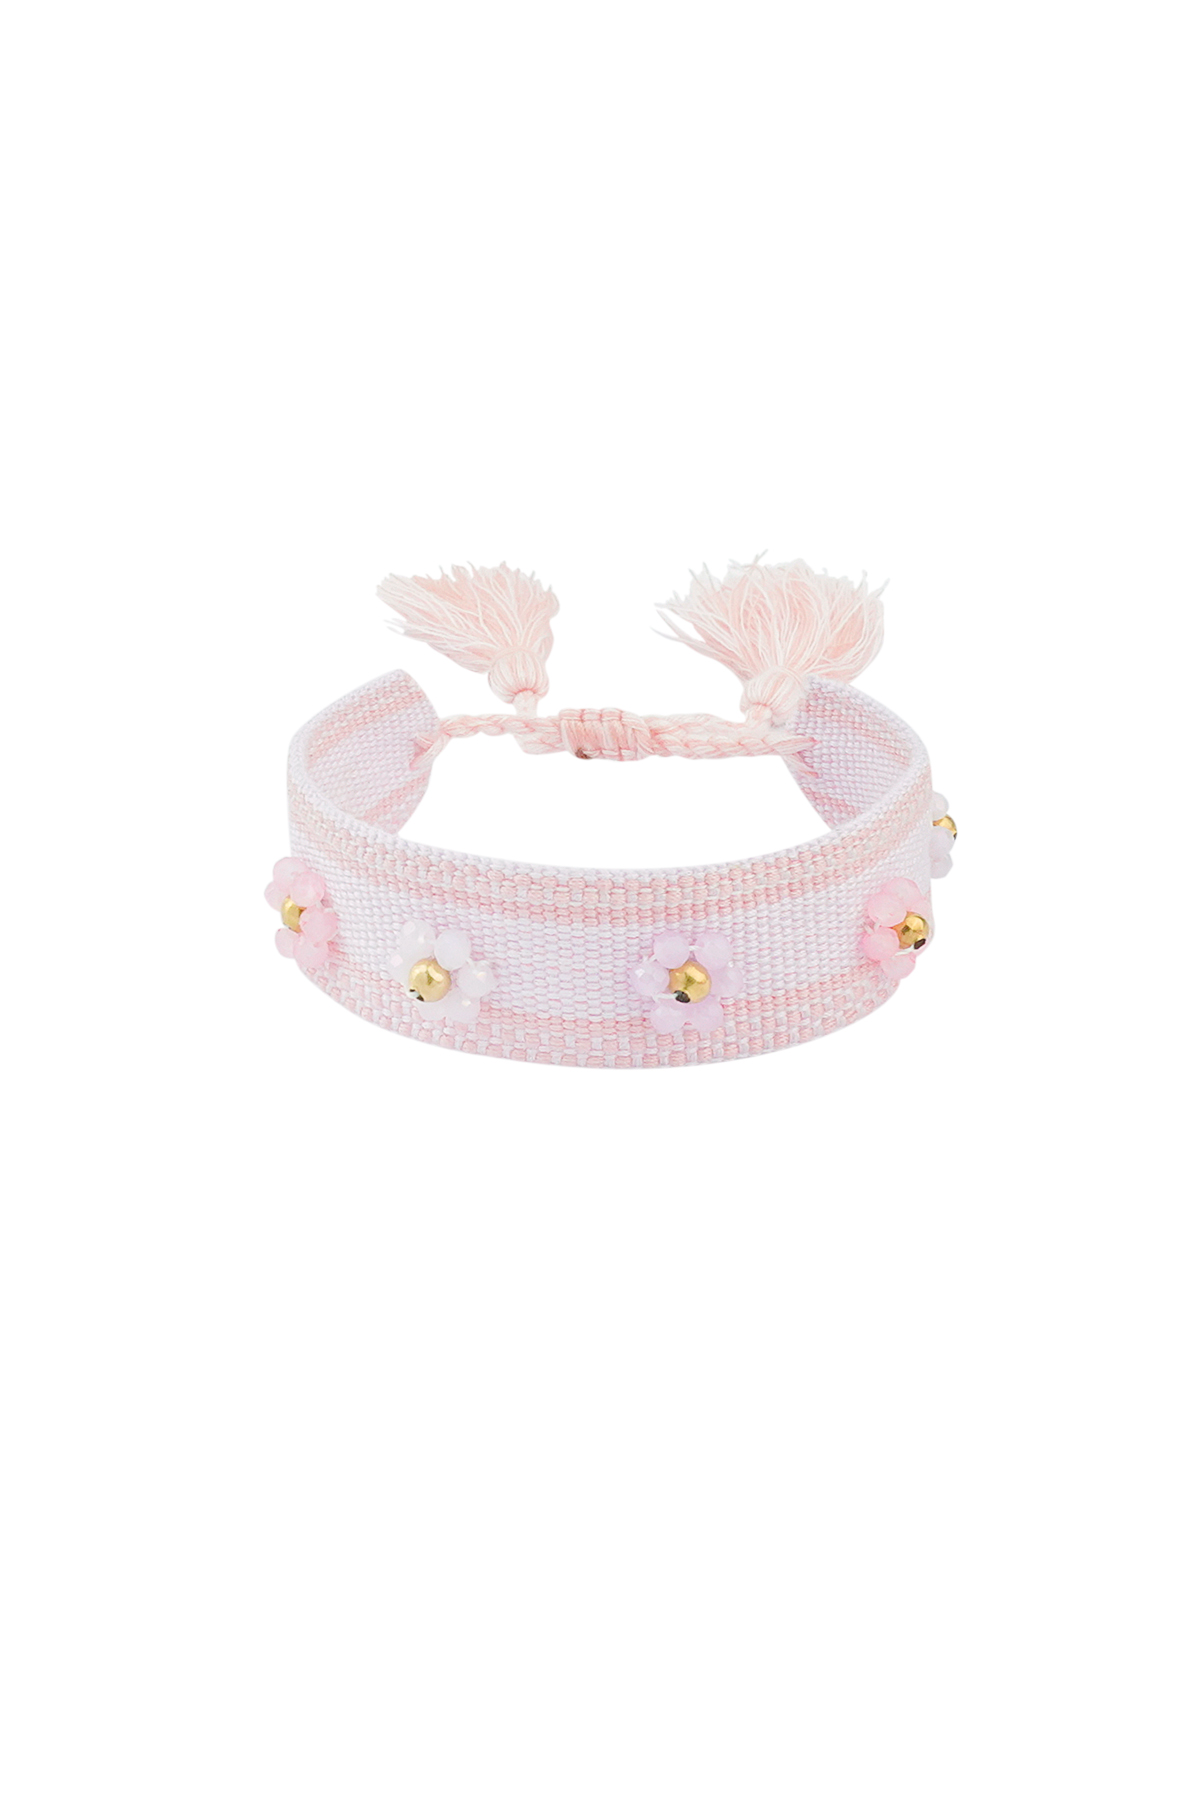 Fabric bracelet with flowers - pale pink h5 